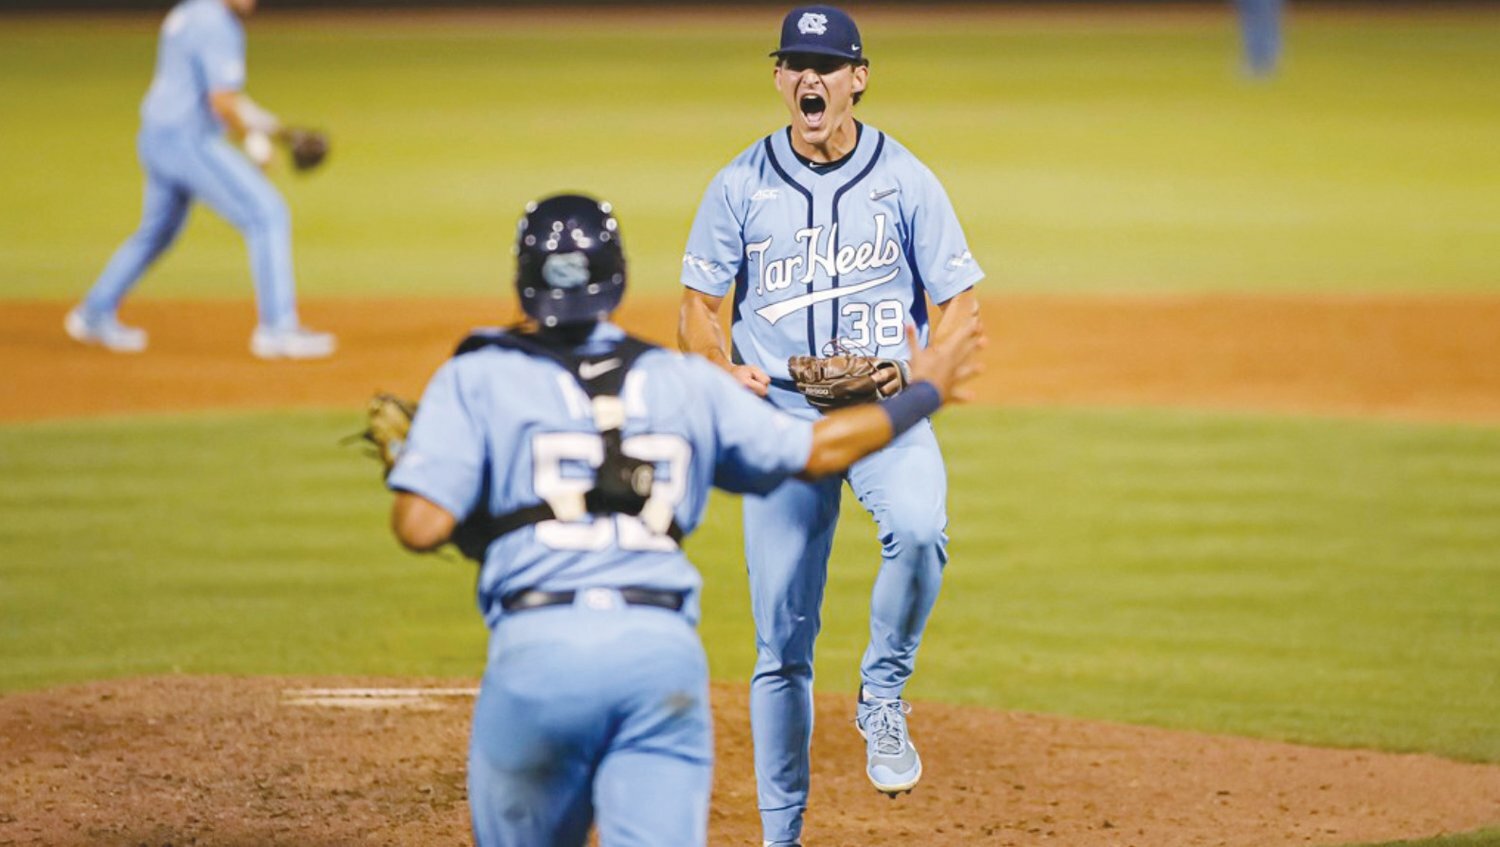 UNC relief pitcher Davis Palermo (38) lets out an emotional celebration after closing out the Tar Heels' 7-3 win over VCU in the NCAA Chapel Hill Regional on June 6, 2022, to advance to the Super Regional.